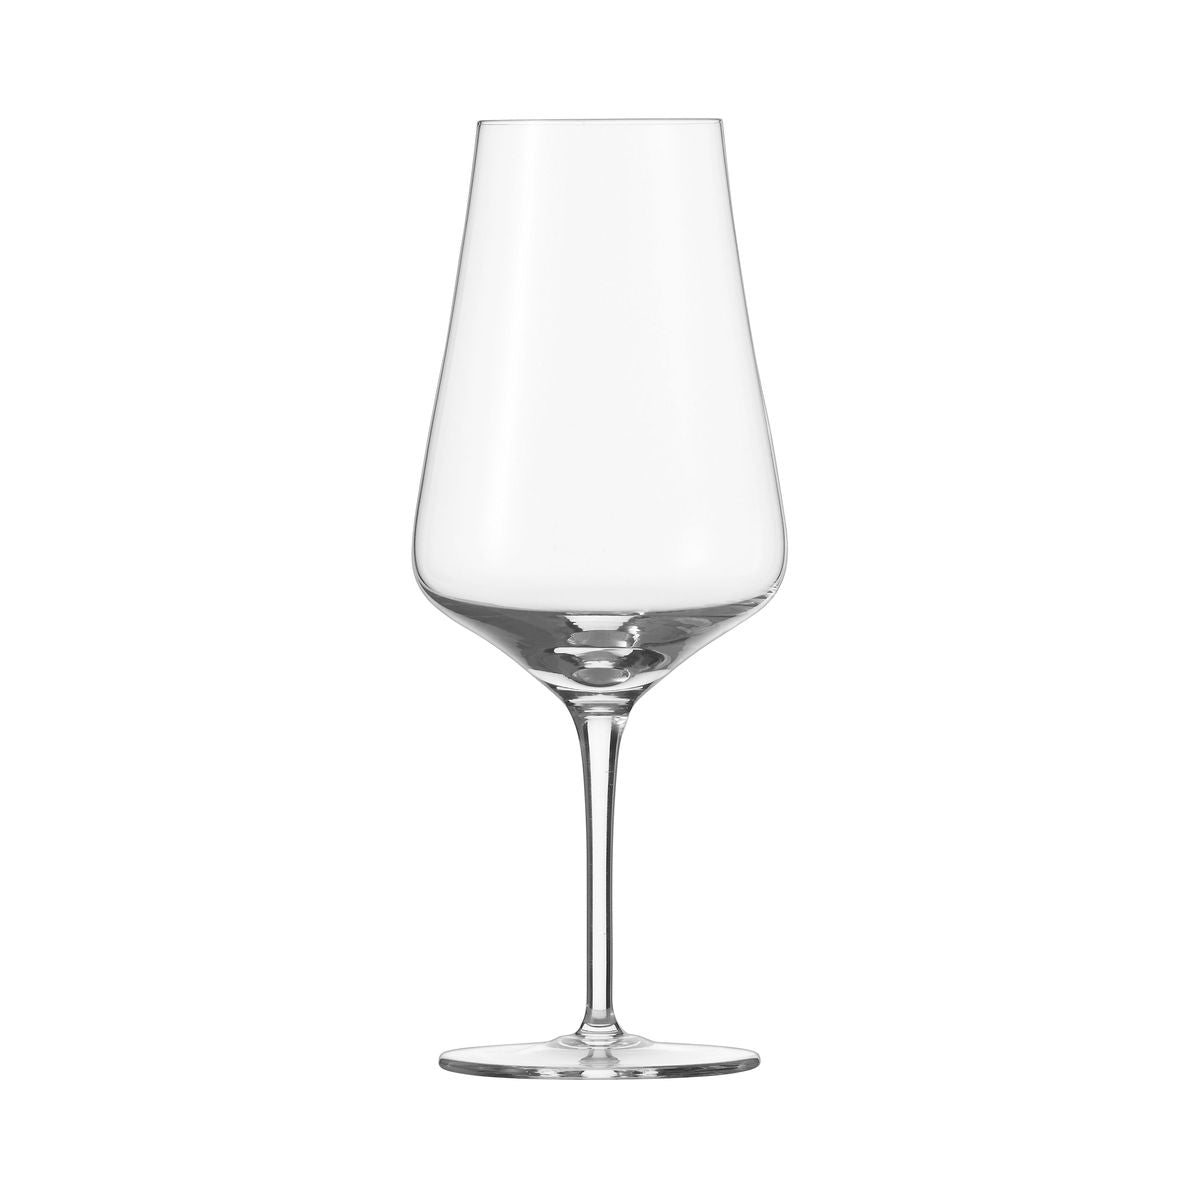 Bordeaux Wine Glass - 660Ml, Fine from Schott Zwiesel. made out of Glass and sold in boxes of 6. Hospitality quality at wholesale price with The Flying Fork! 